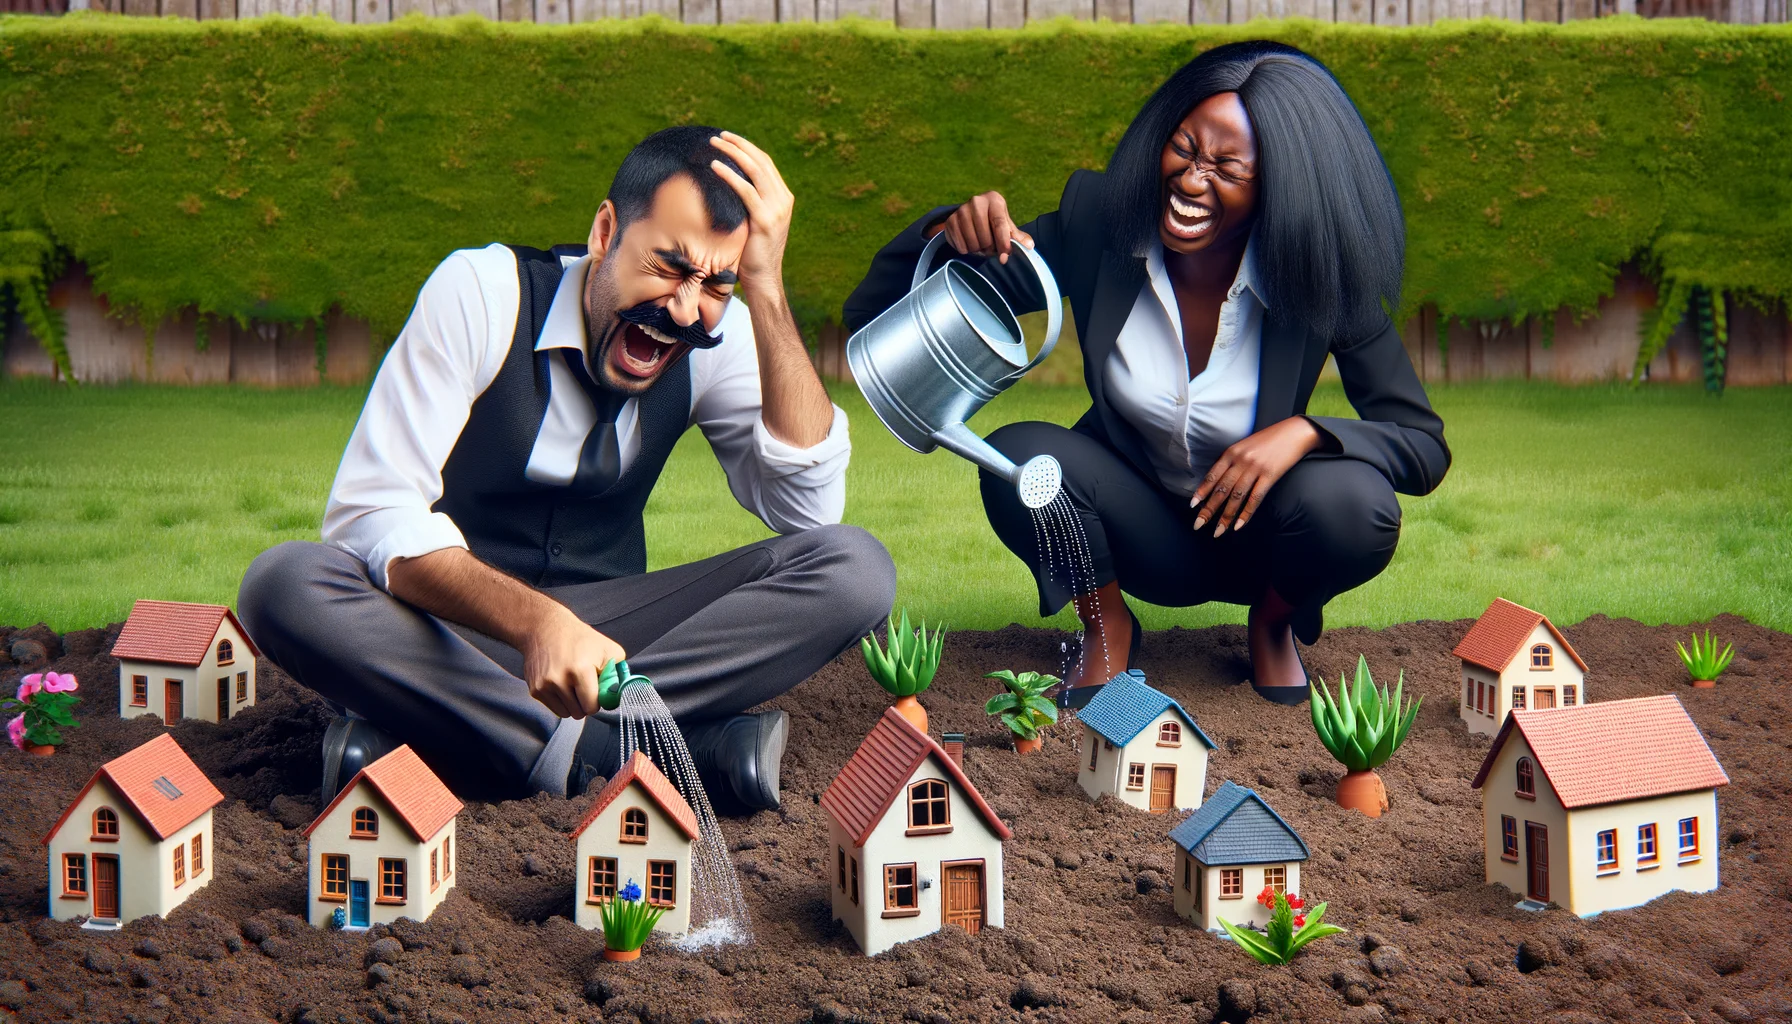 Generate a humorous, lifelike image that satirizes the notion of house investment. Imagine a scene where an exasperated South Asian man dressed in casual attire is trying to plant miniature houses in a garden as if they were seeds. By his side, a Black woman wearing business attire laughingly waters the miniature houses with a watering can. Around them, the greenery is flourishing, while the soil where the 'house seeds' were planted remains barren.